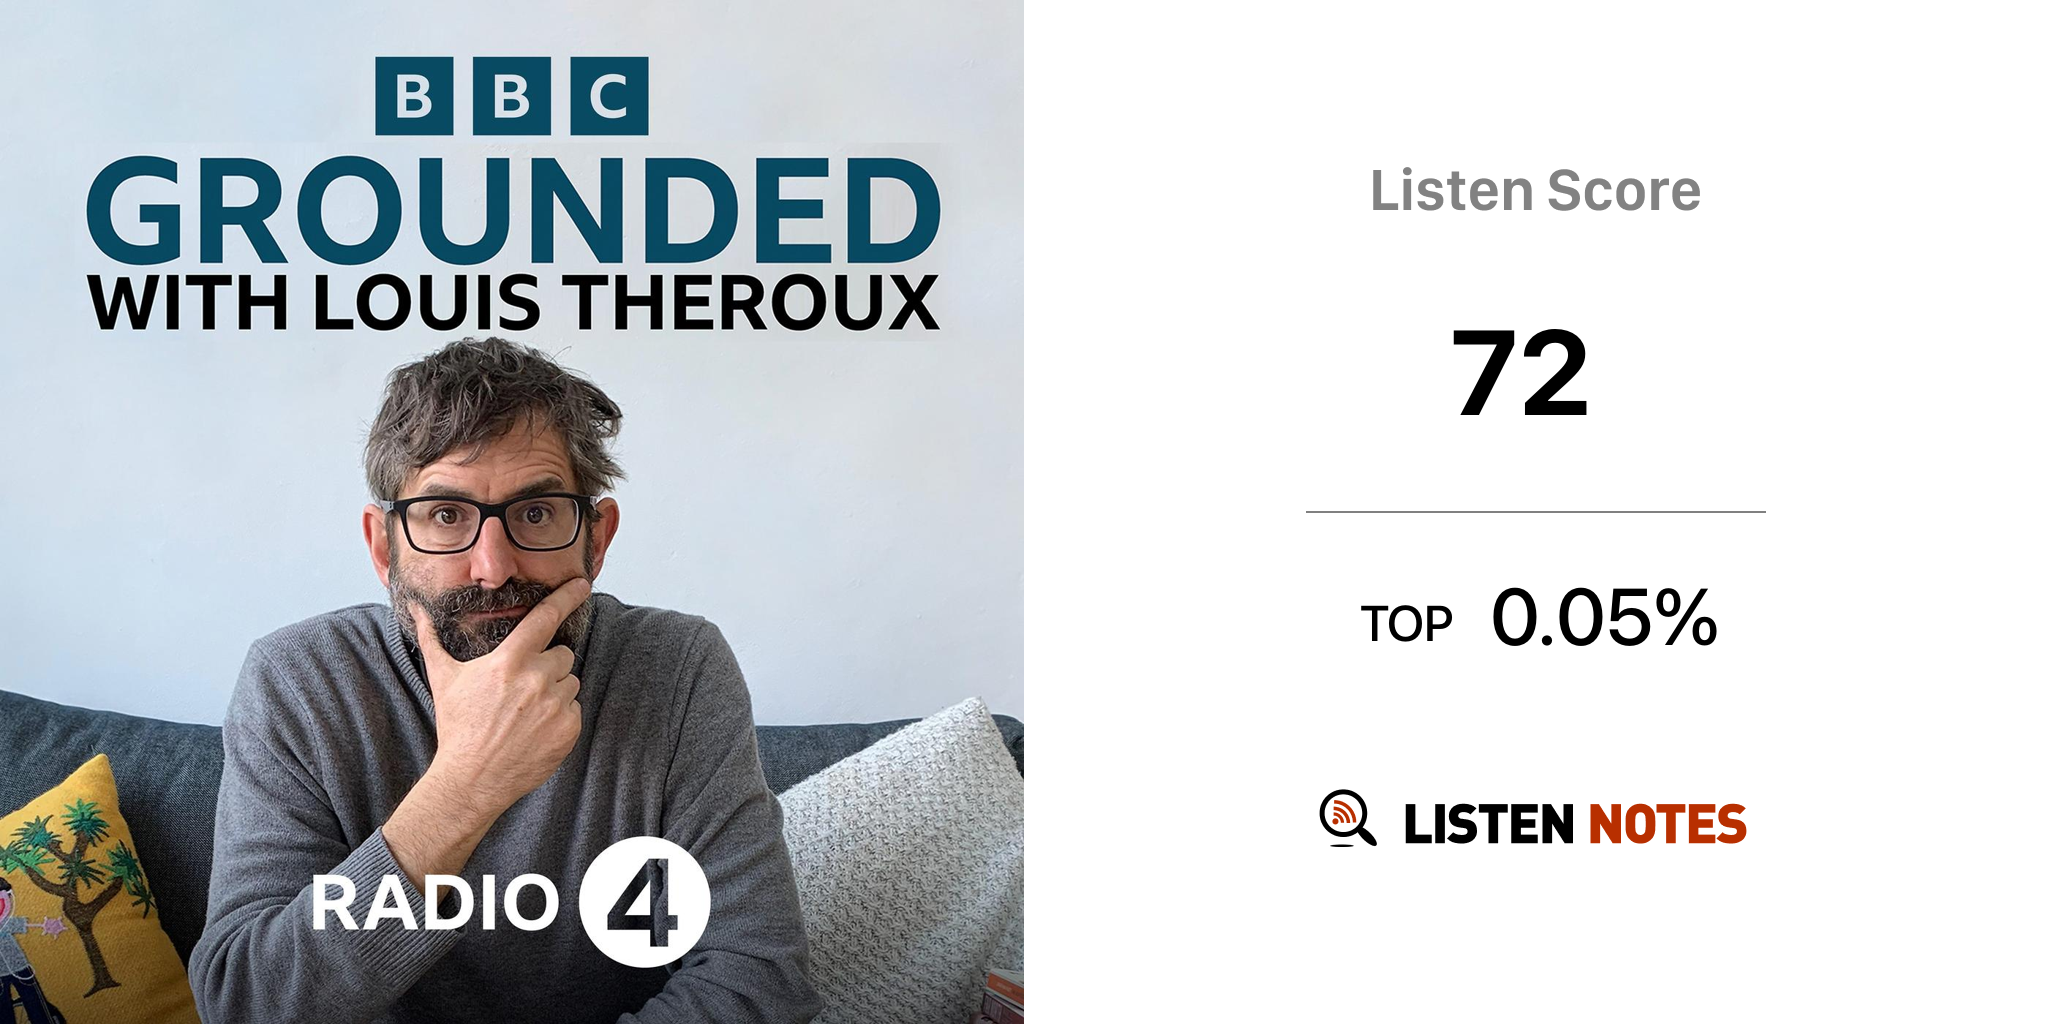 Grounded with Louis Theroux (podcast) BBC Radio 4 Listen Notes